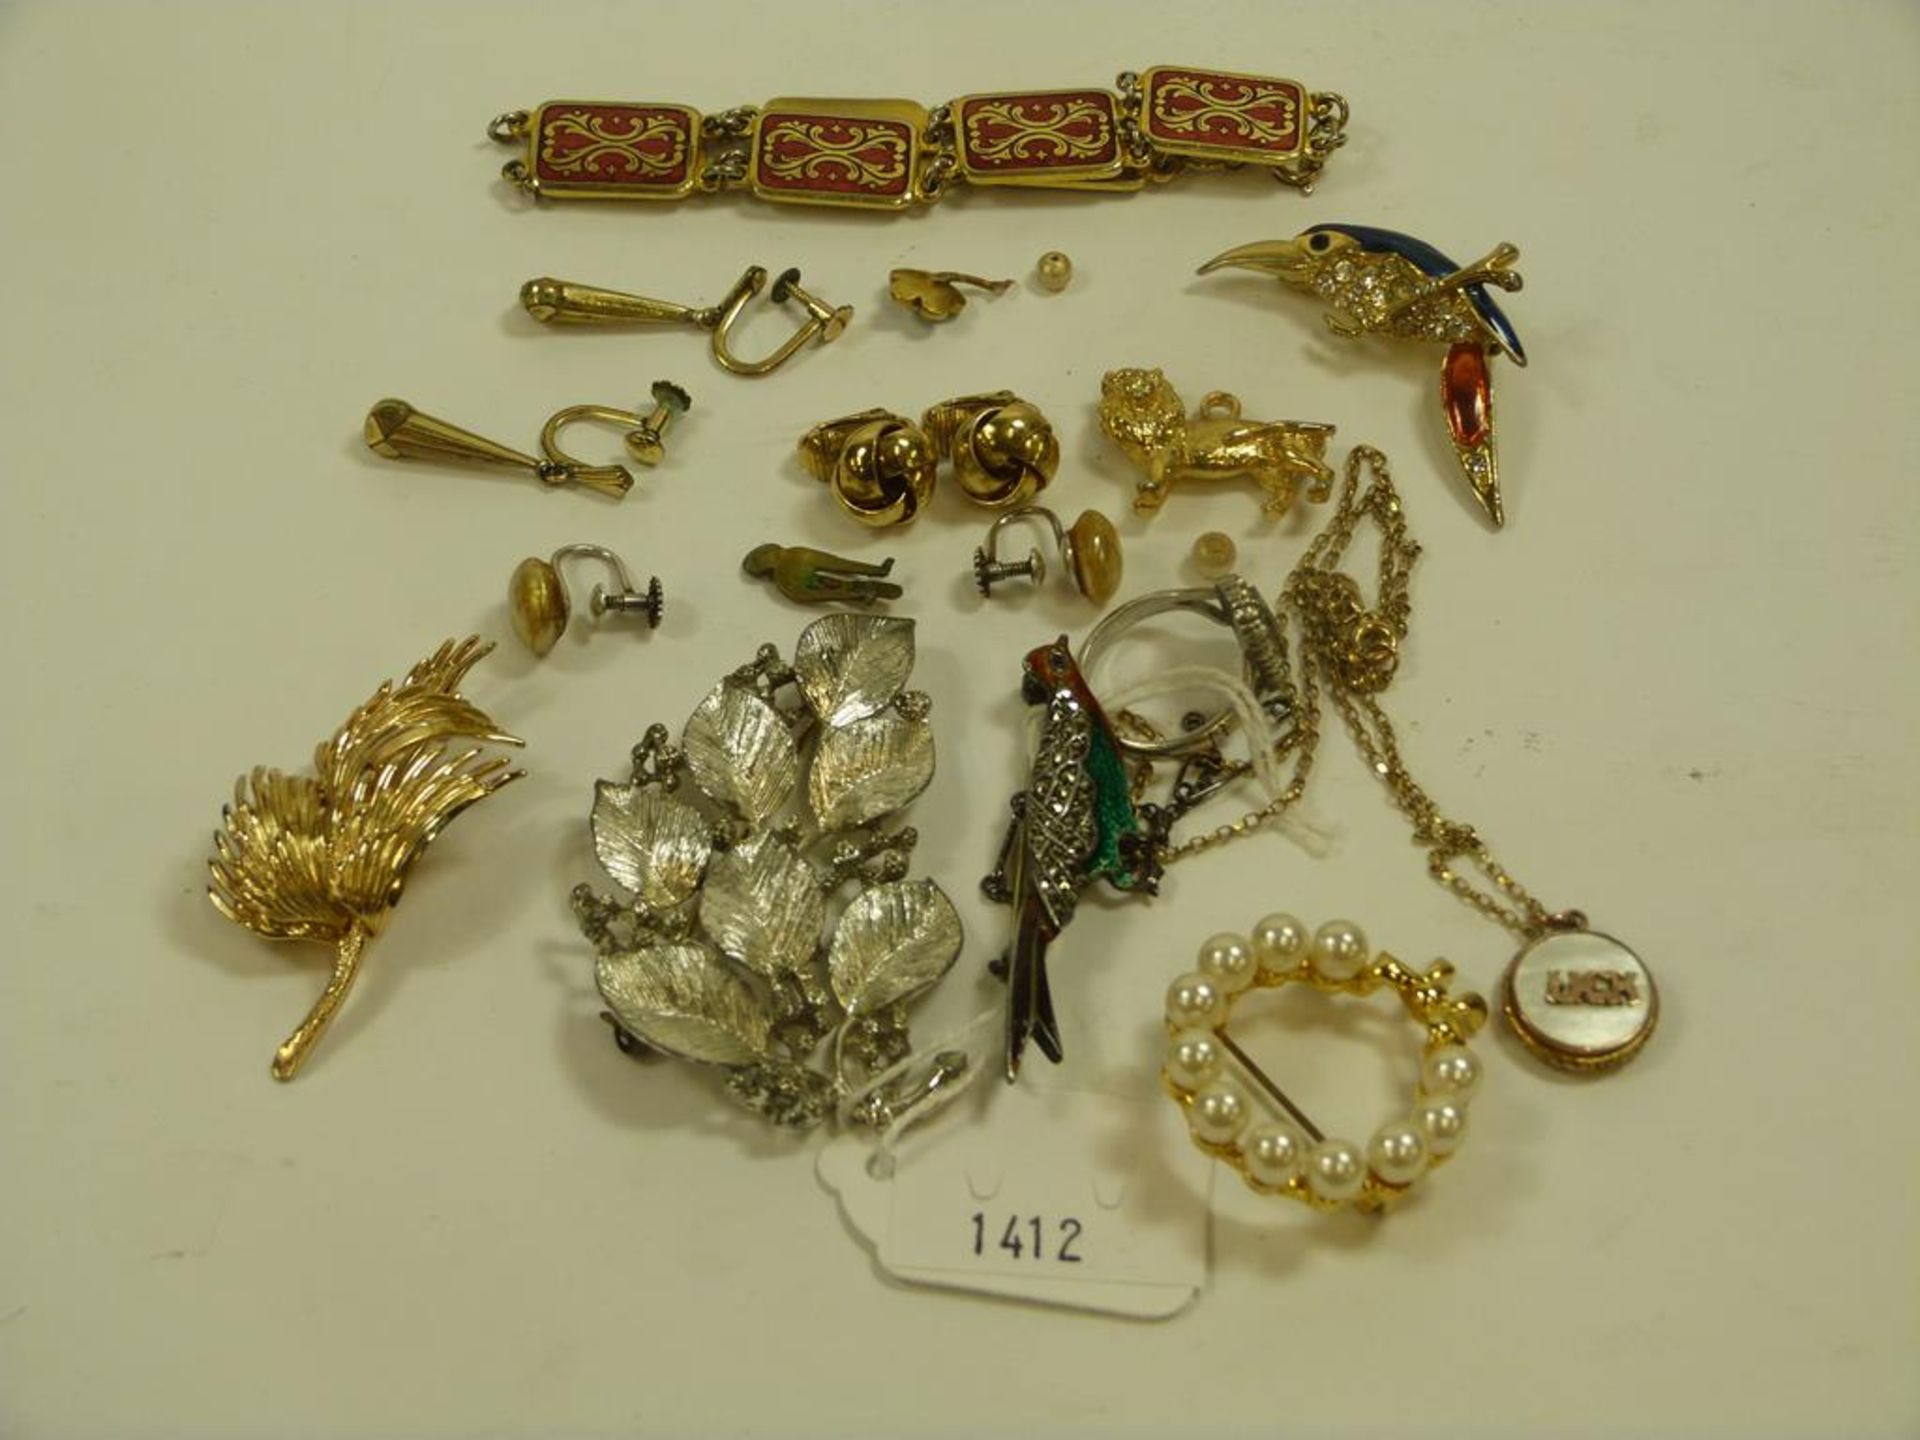 A fine 9ct Gold Chain (with pendant) a Silver and Marcasite Brooch, a Silver Ring and a small